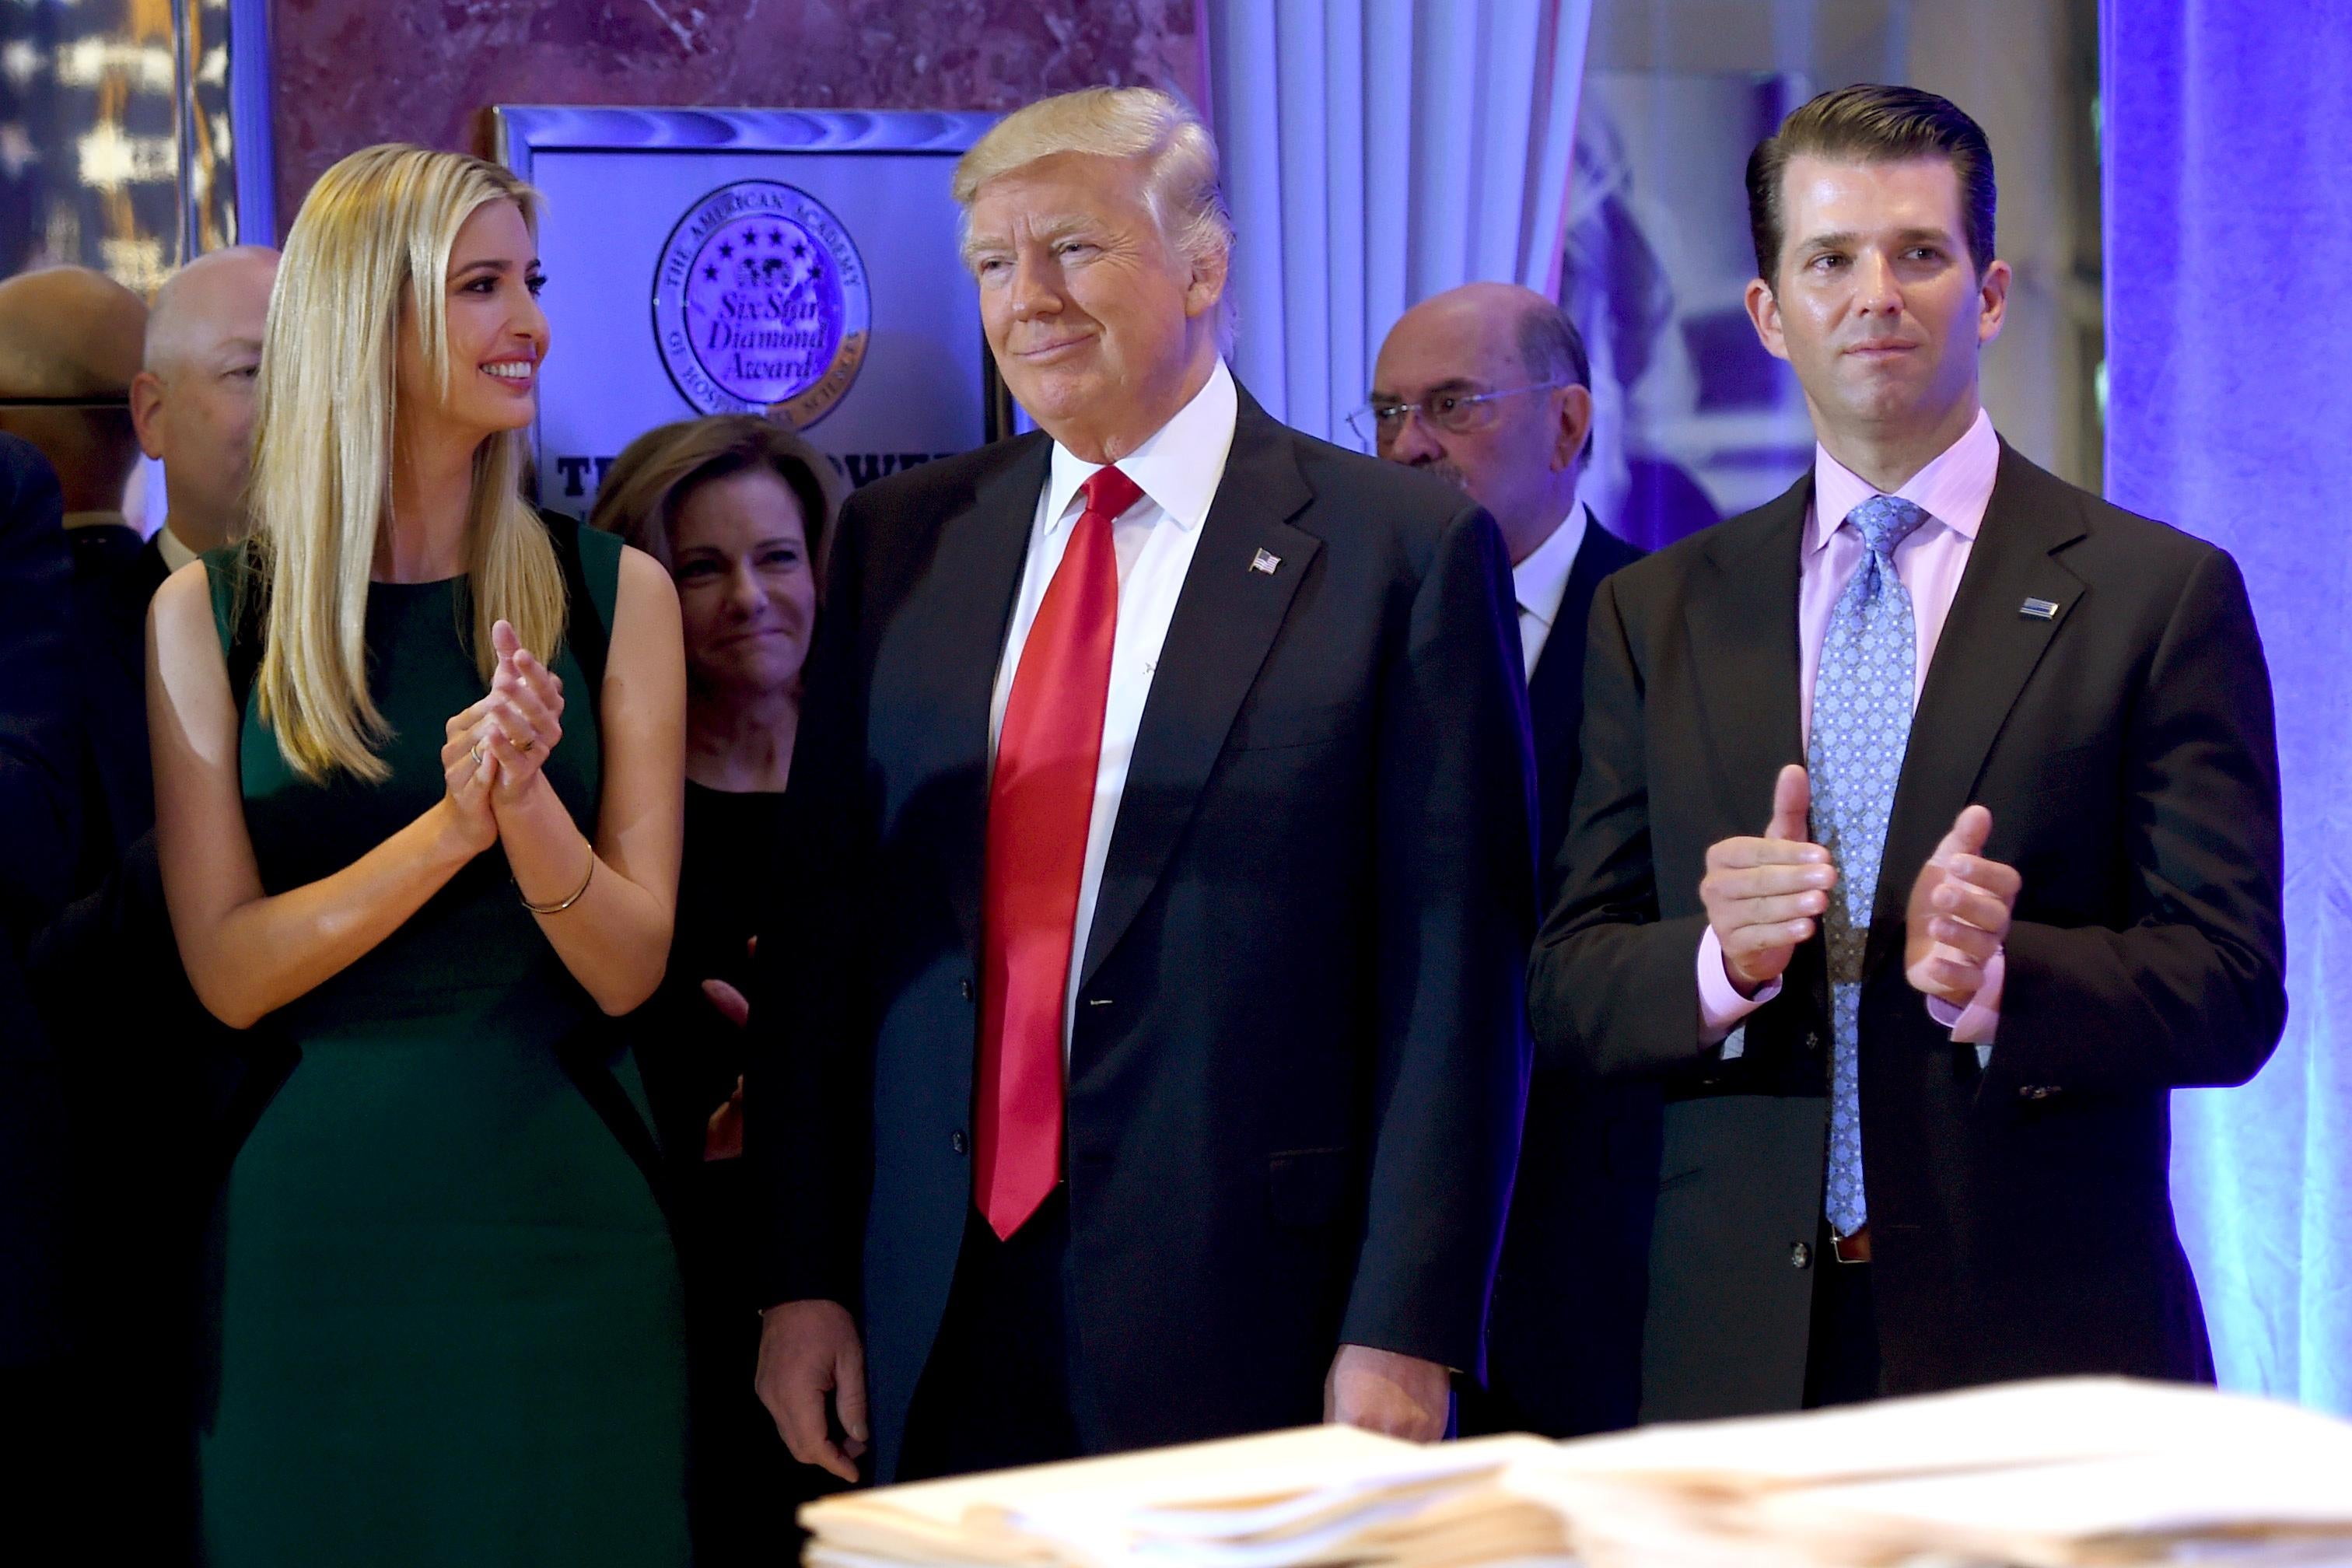 Donald Trump stands with his children Ivanka and Donald Jr., who applaud.